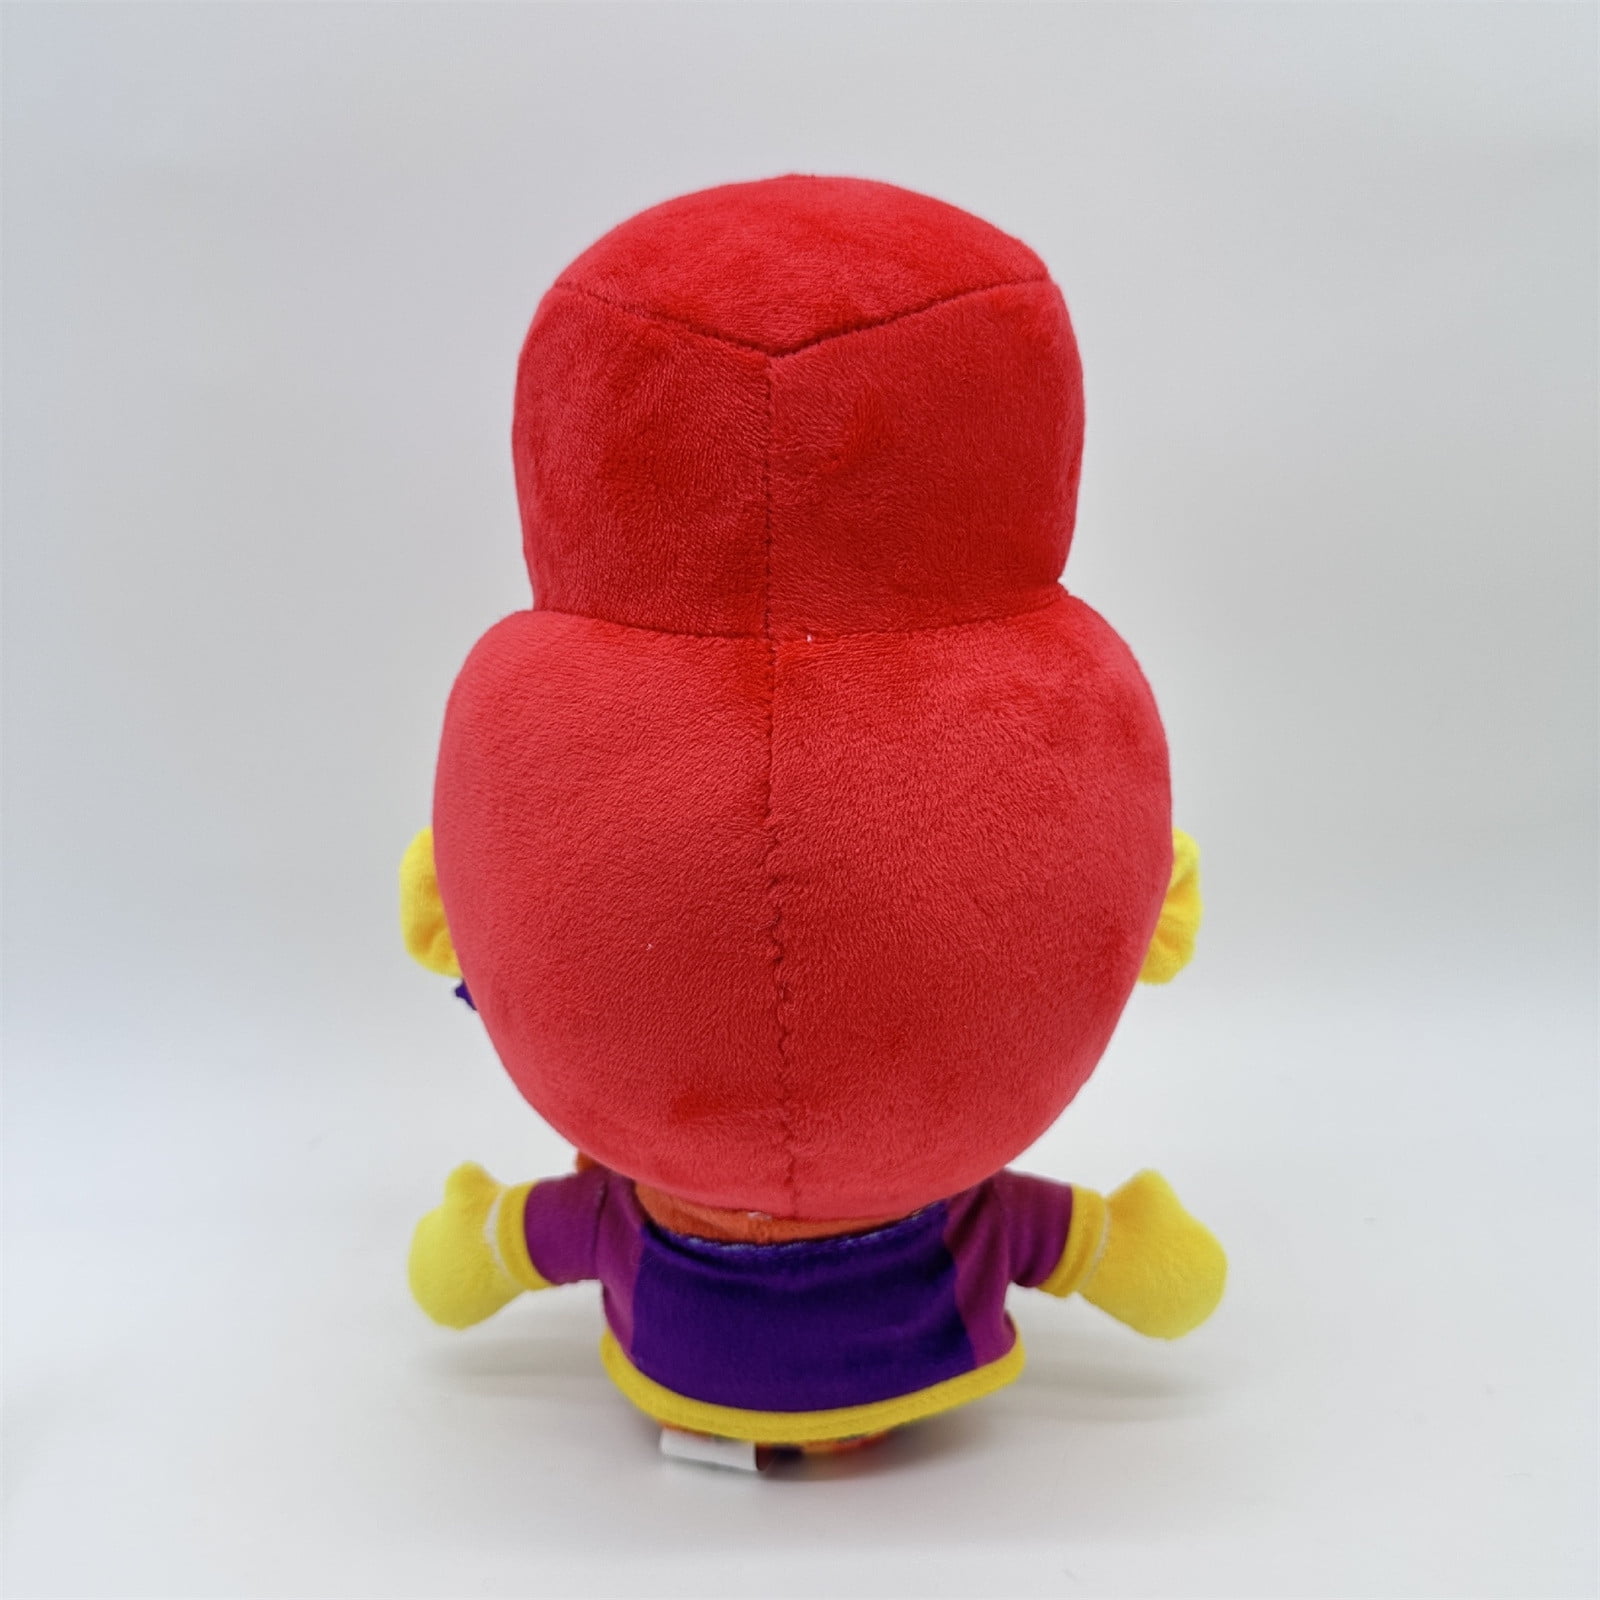 1pc 21cm Plush Toy With Purple Hair Boy Design, Ideal As Festival Or  Birthday Gift